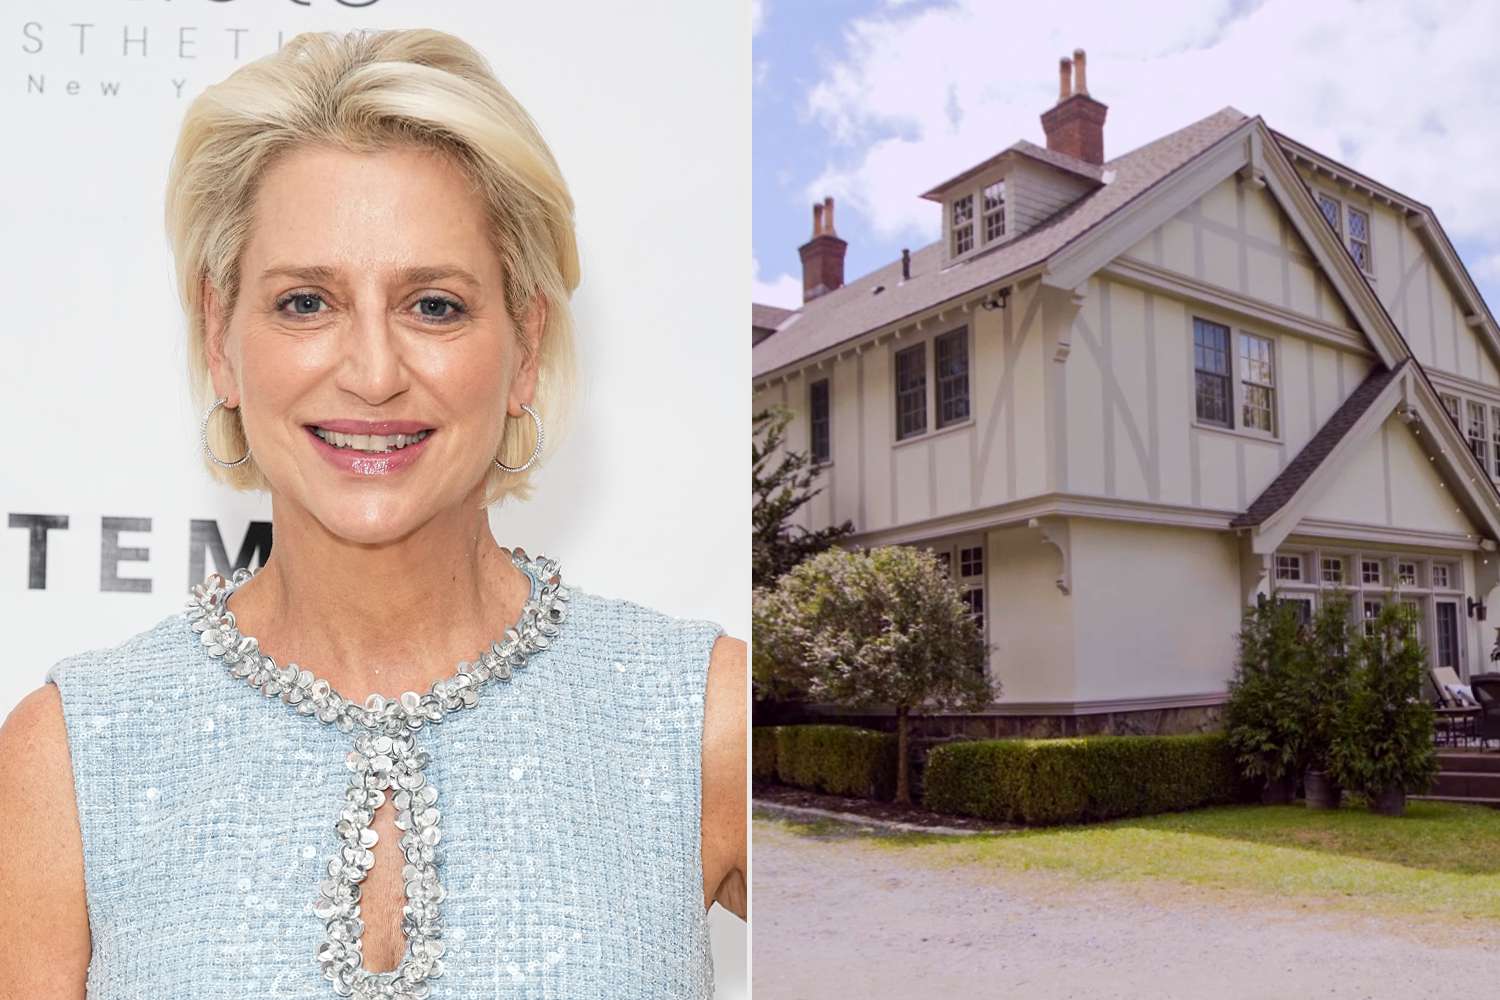 'RHONY' Alum Dorinda Medley Has a Spin-Off Centered on Blue Stone Manor in the Works at Bravo